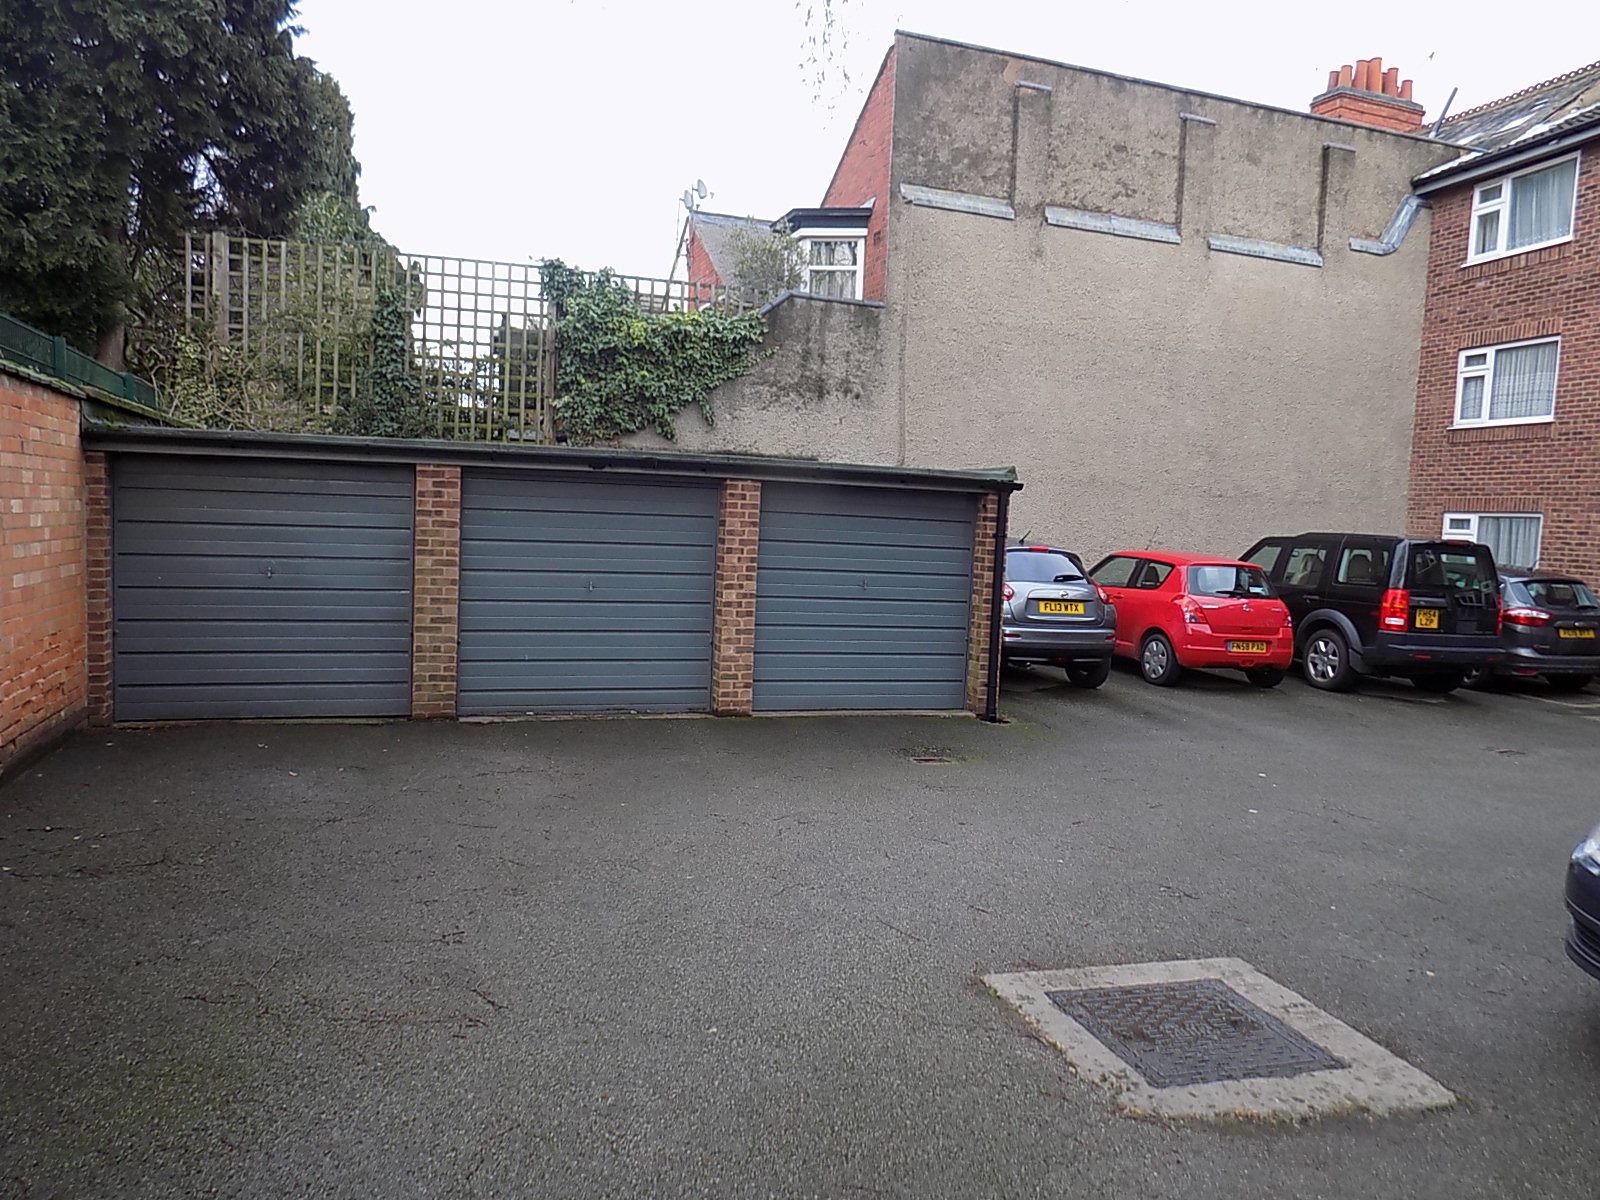 Ground Floor Flat in Leicester | Flat 3 - SDL Auctions